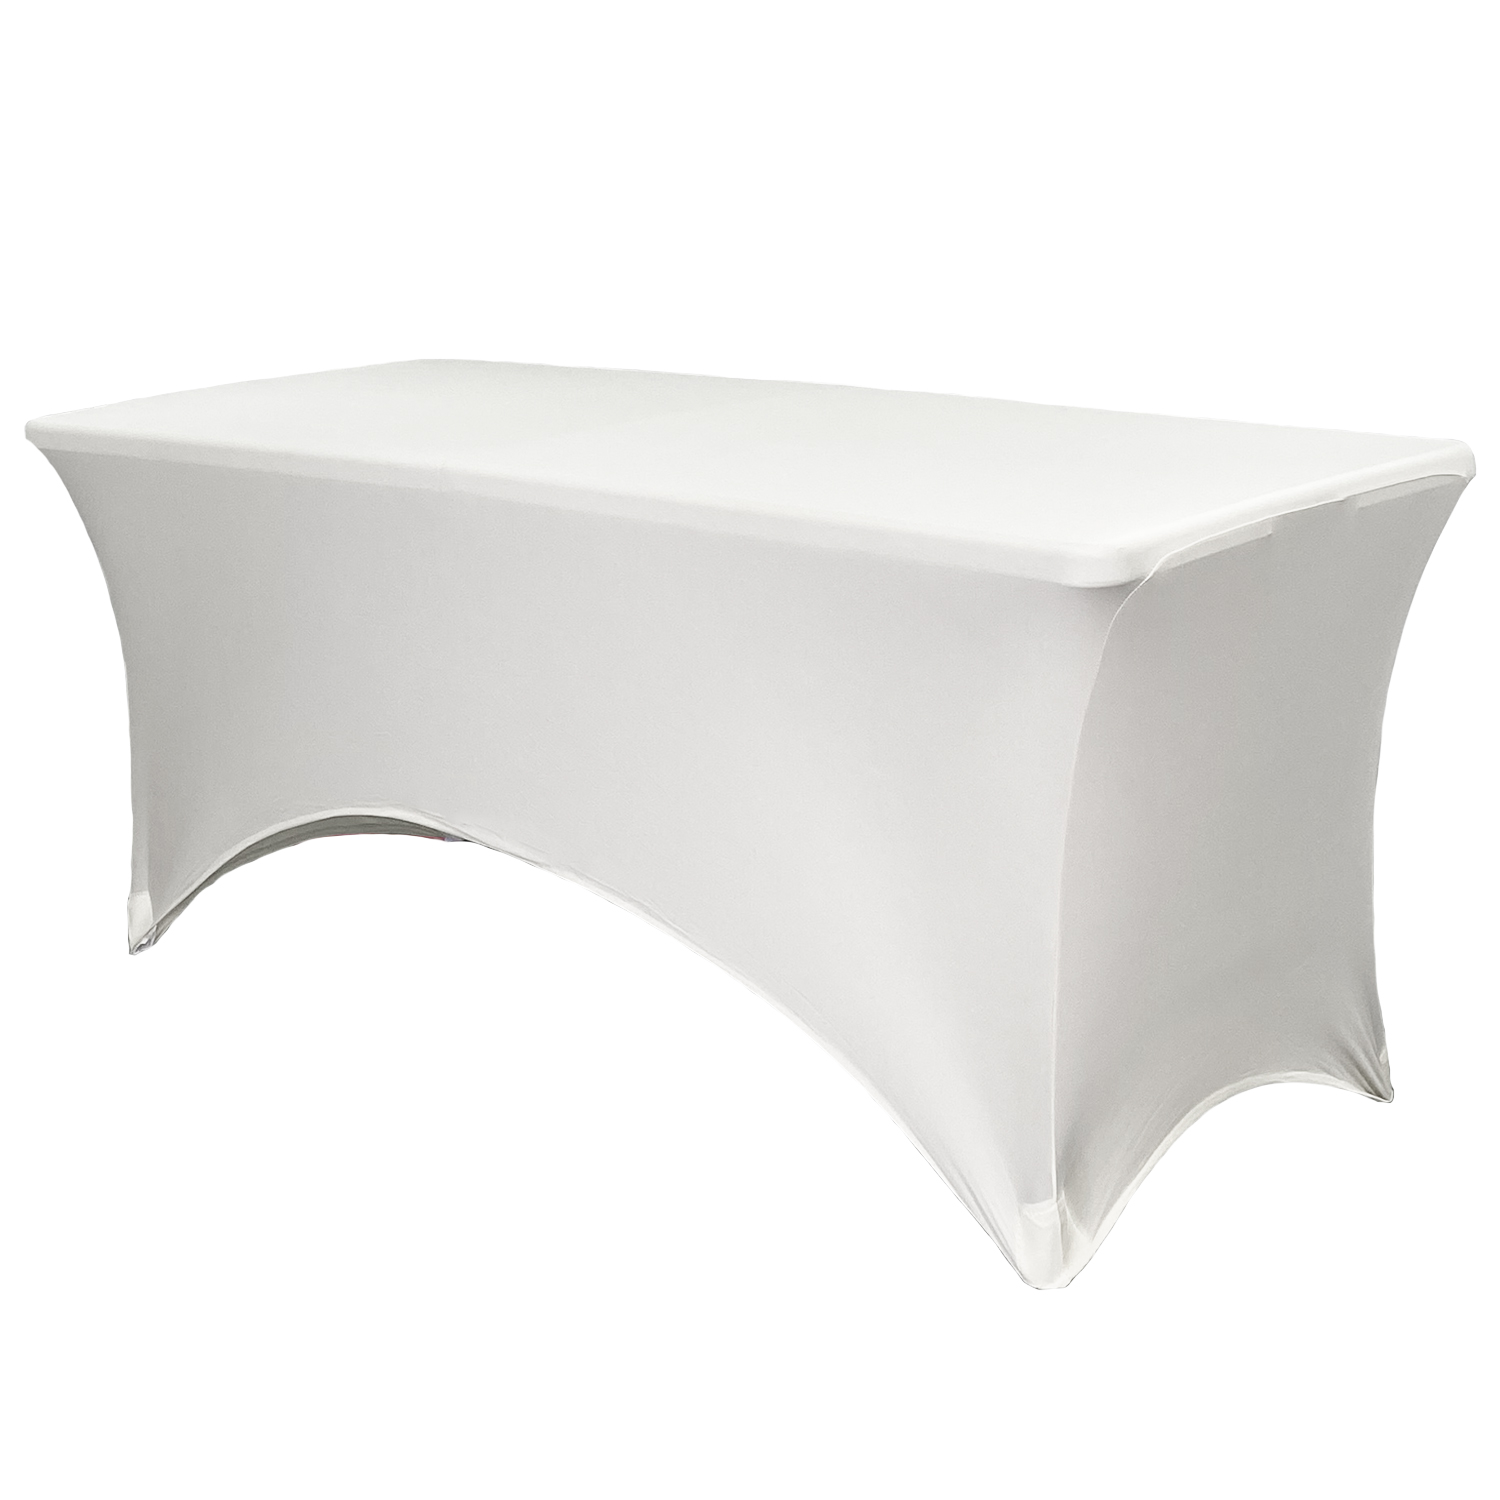 Your Chair Covers - Stretch Spandex 5 ft Rectangular Table Cover White for Wedding, Party, Birthday, Patio, etc. - image 1 of 3